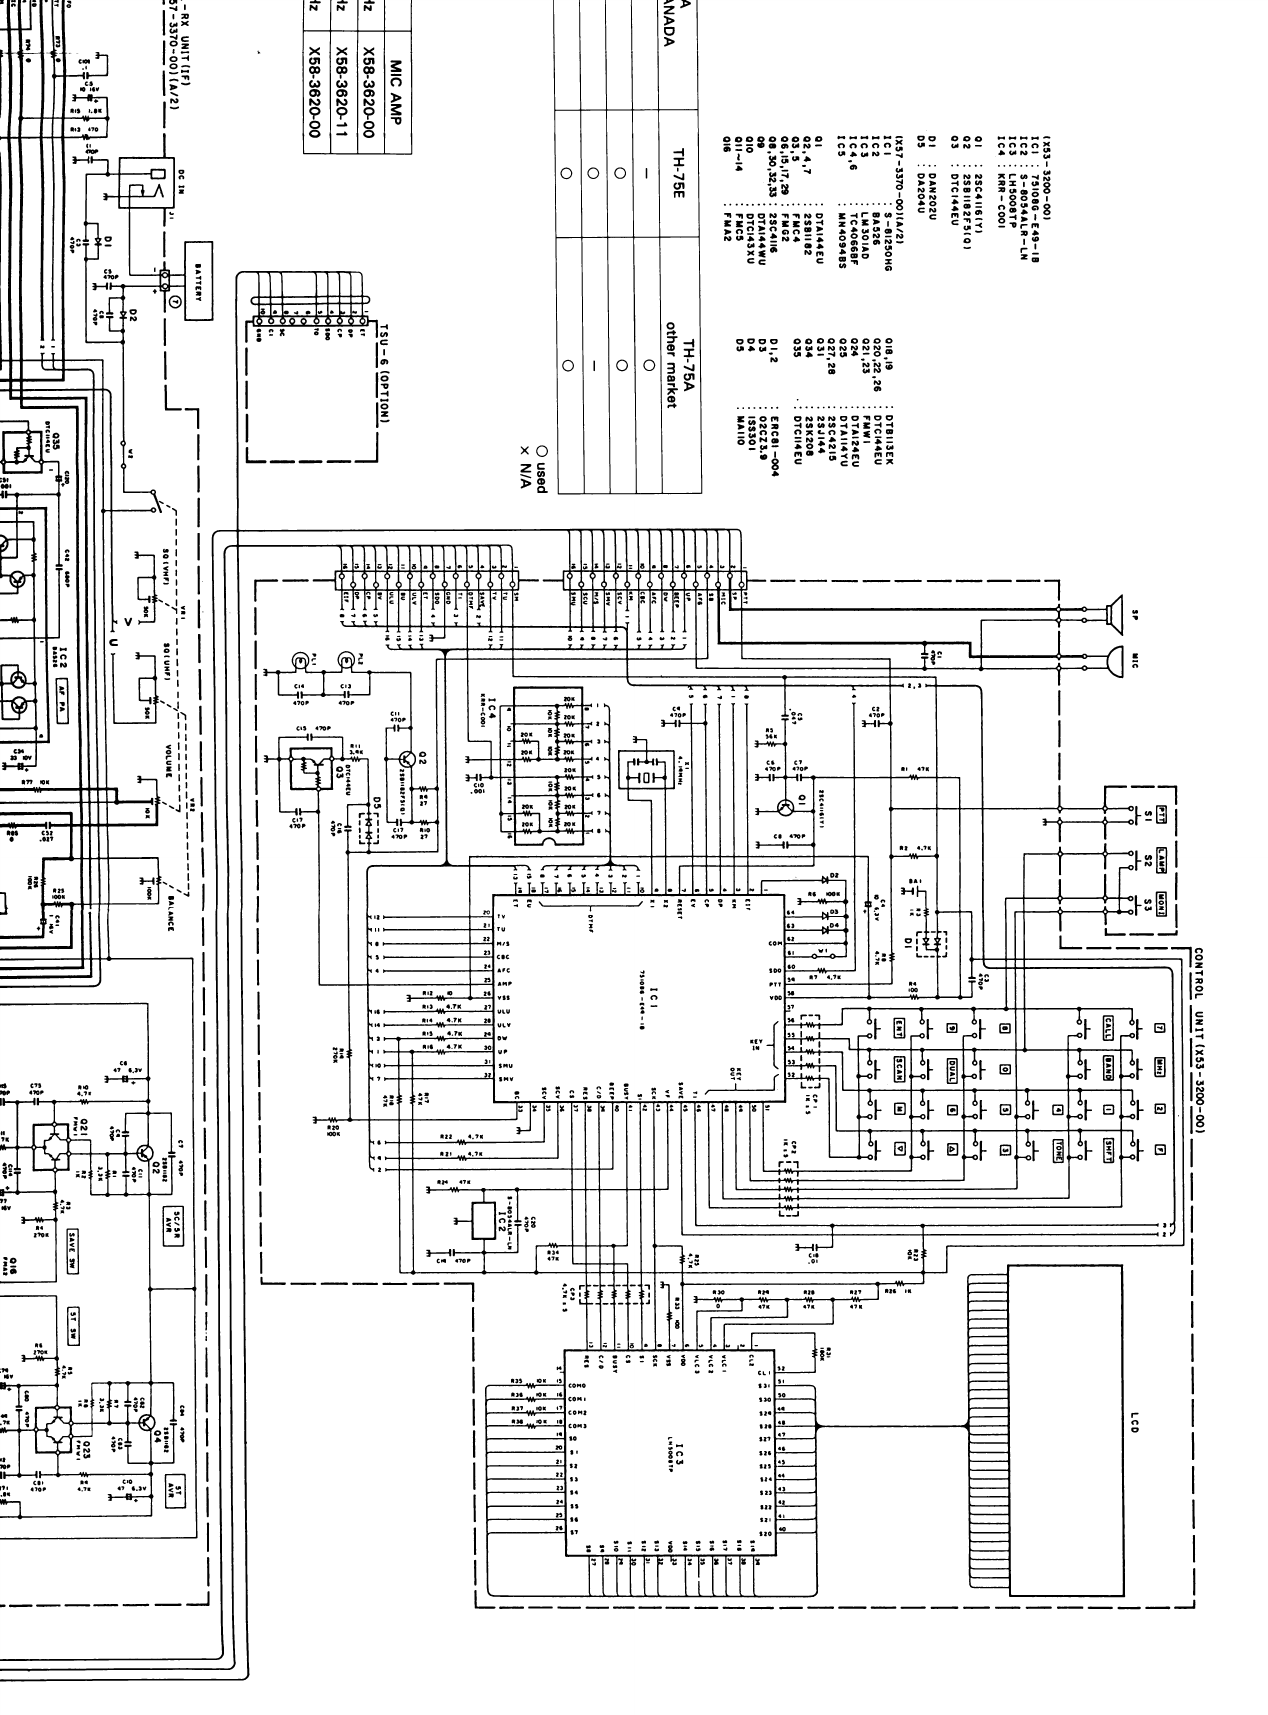 Page 2 of 4 - KENWOOD--TH-75-Schematic